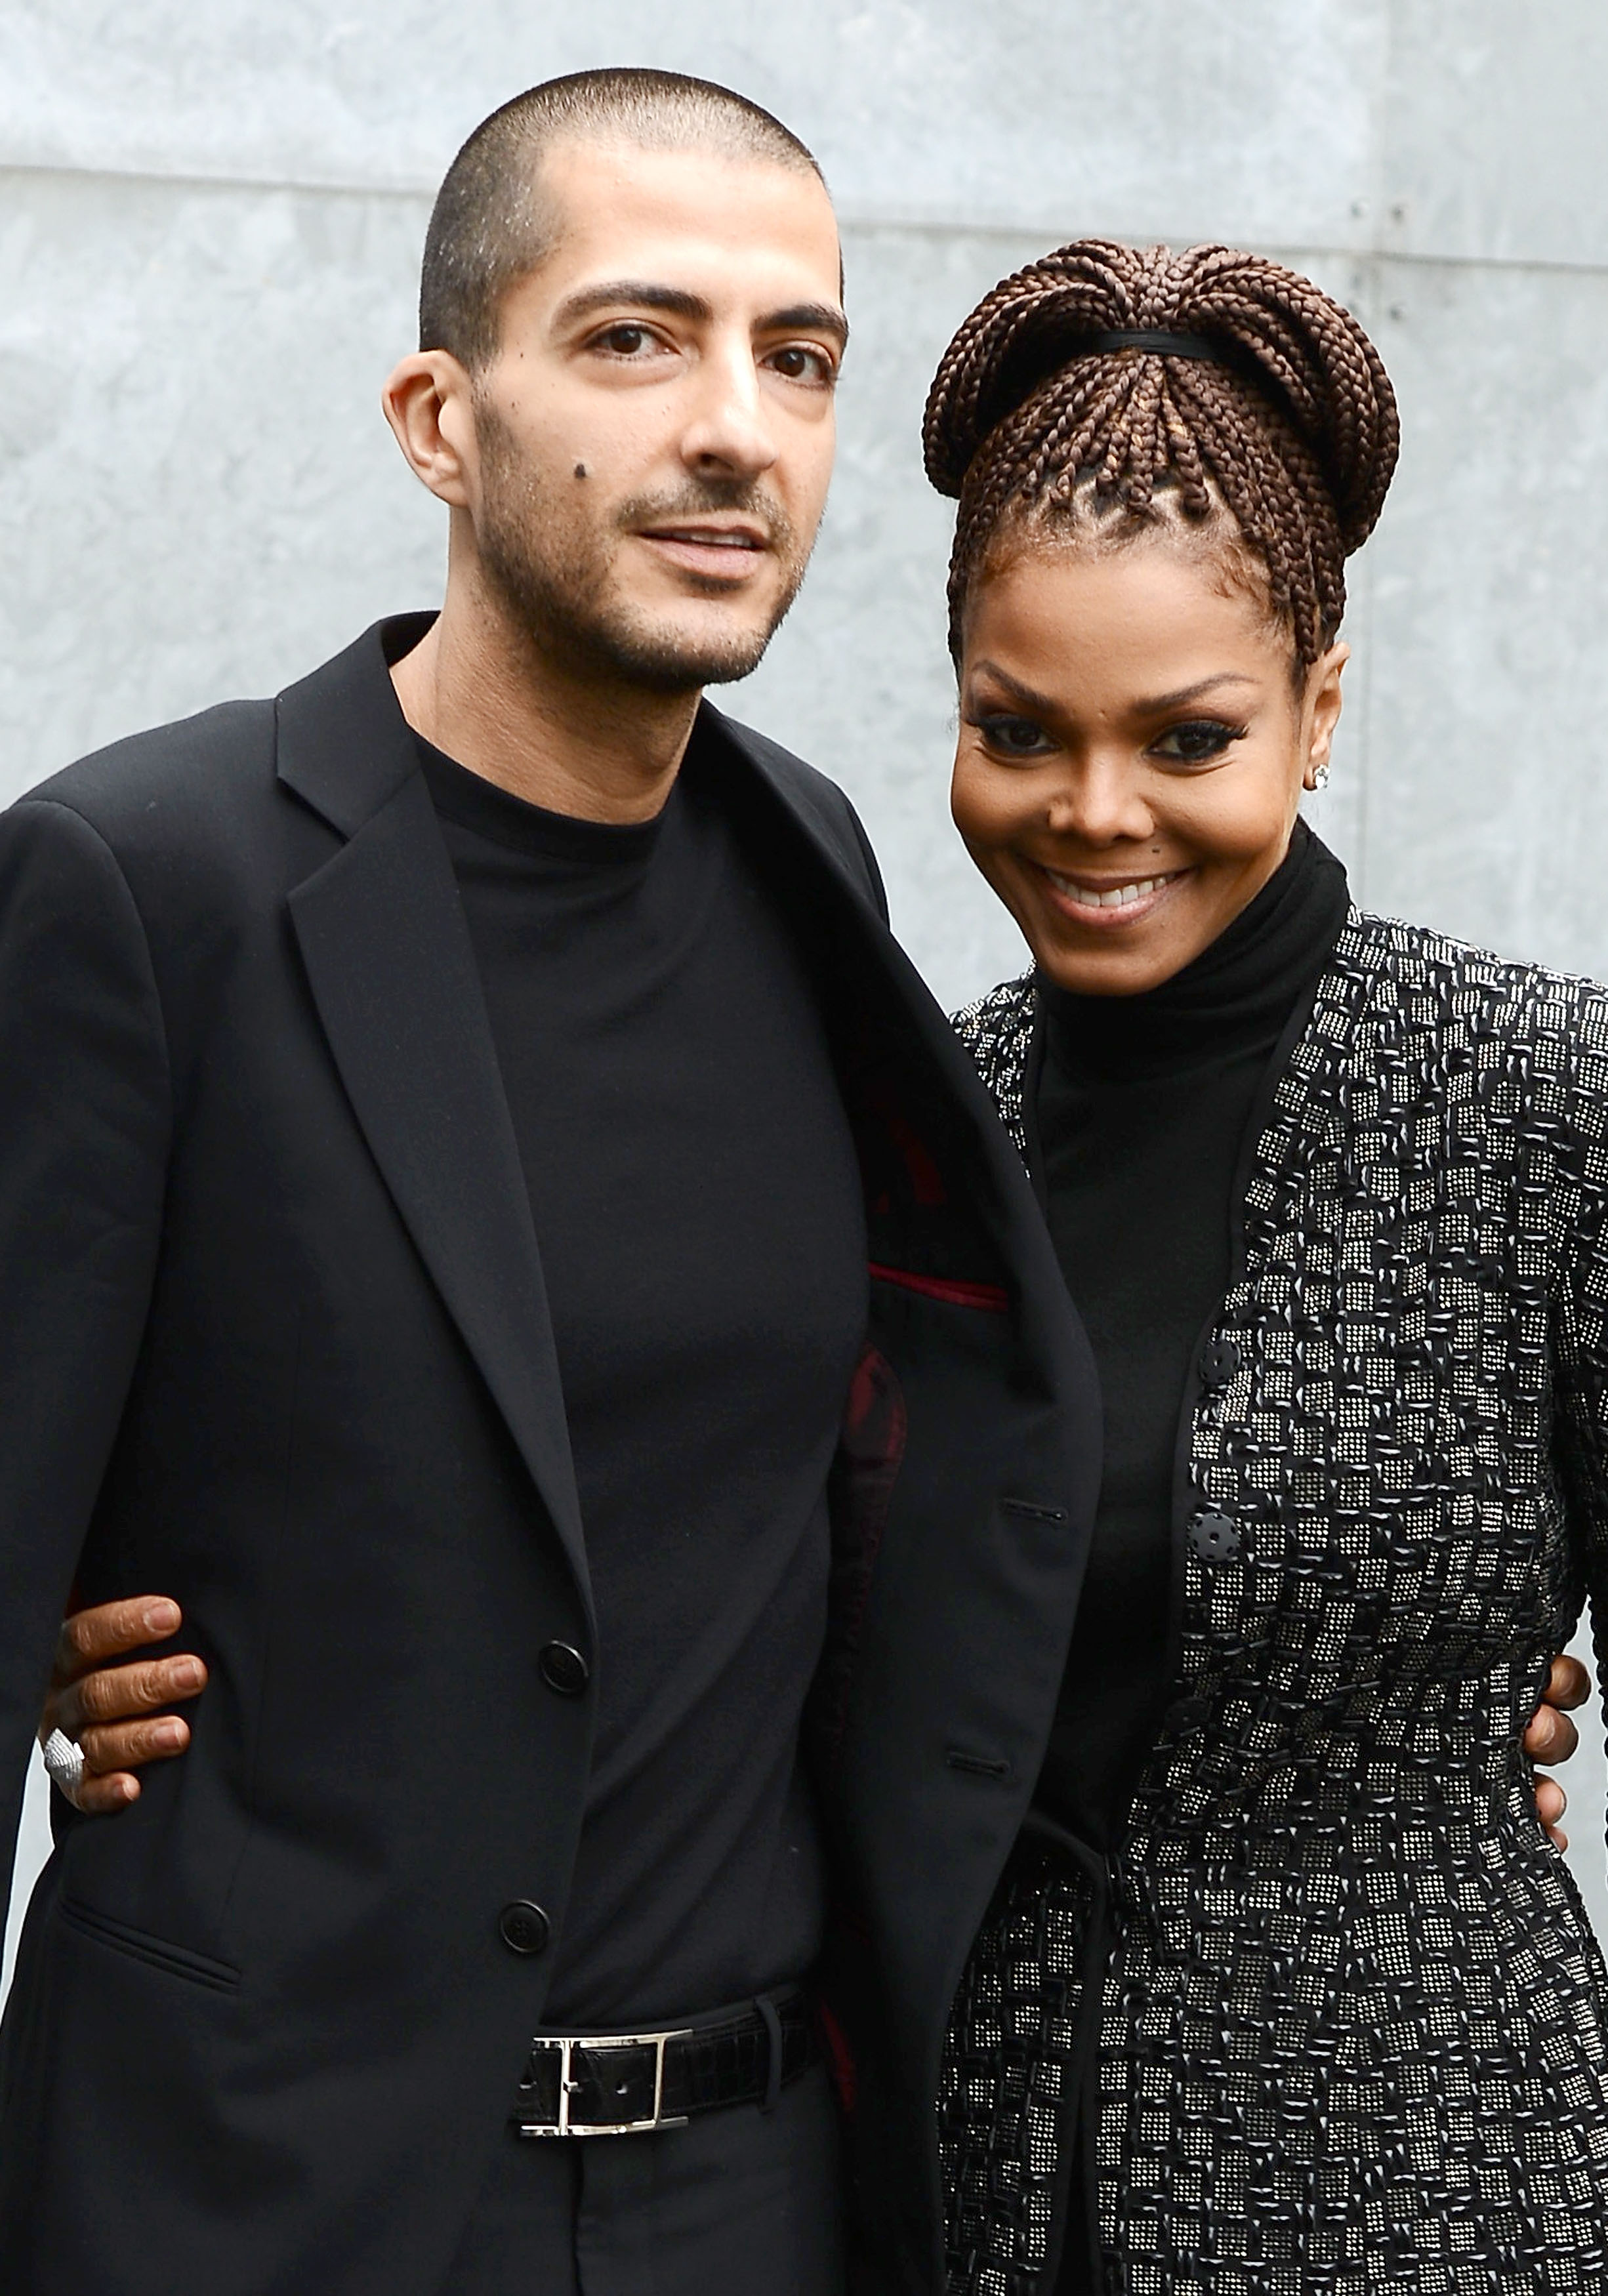 Wissam Al Mana and Janet Jackson attend the Giorgio Armani fashion show in Milan, Italy, on February 25, 2013. | Source: Getty Images